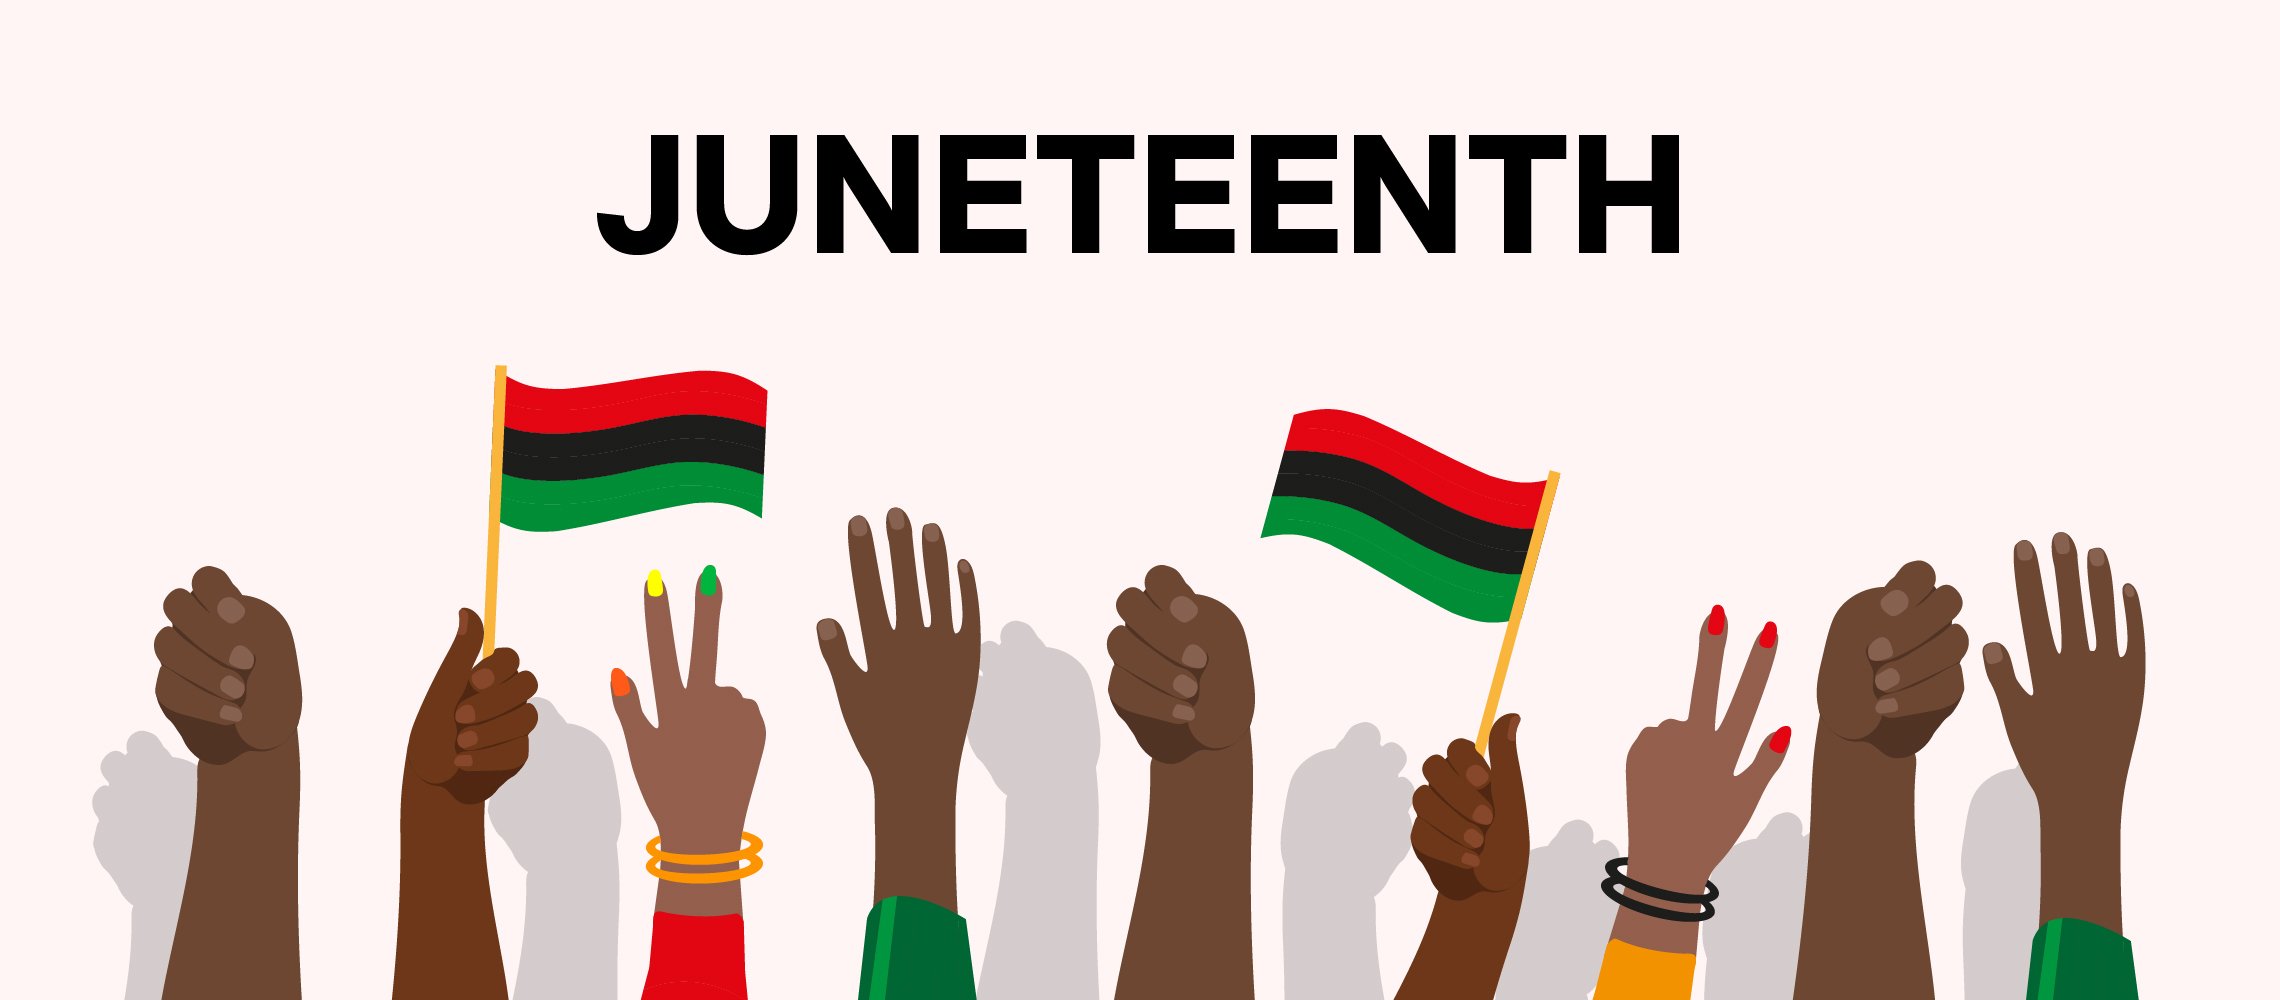 Juneteenth in bold letters. Below that, an assortment of black hands held in fists, peace signs, or holding a Juneteenth flag. 